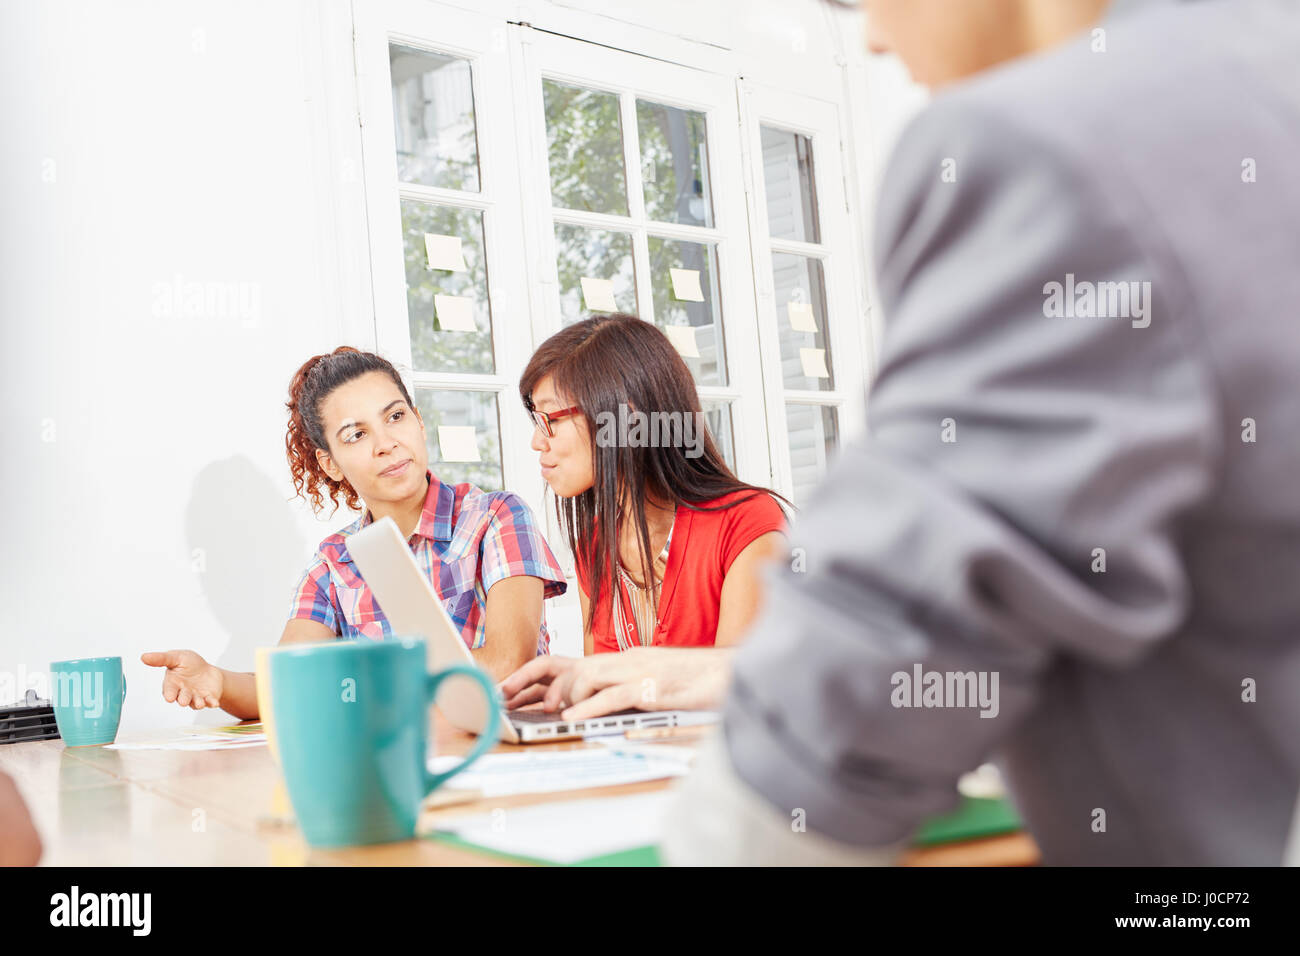 Business meeting discussion planning in startup Stock Photo